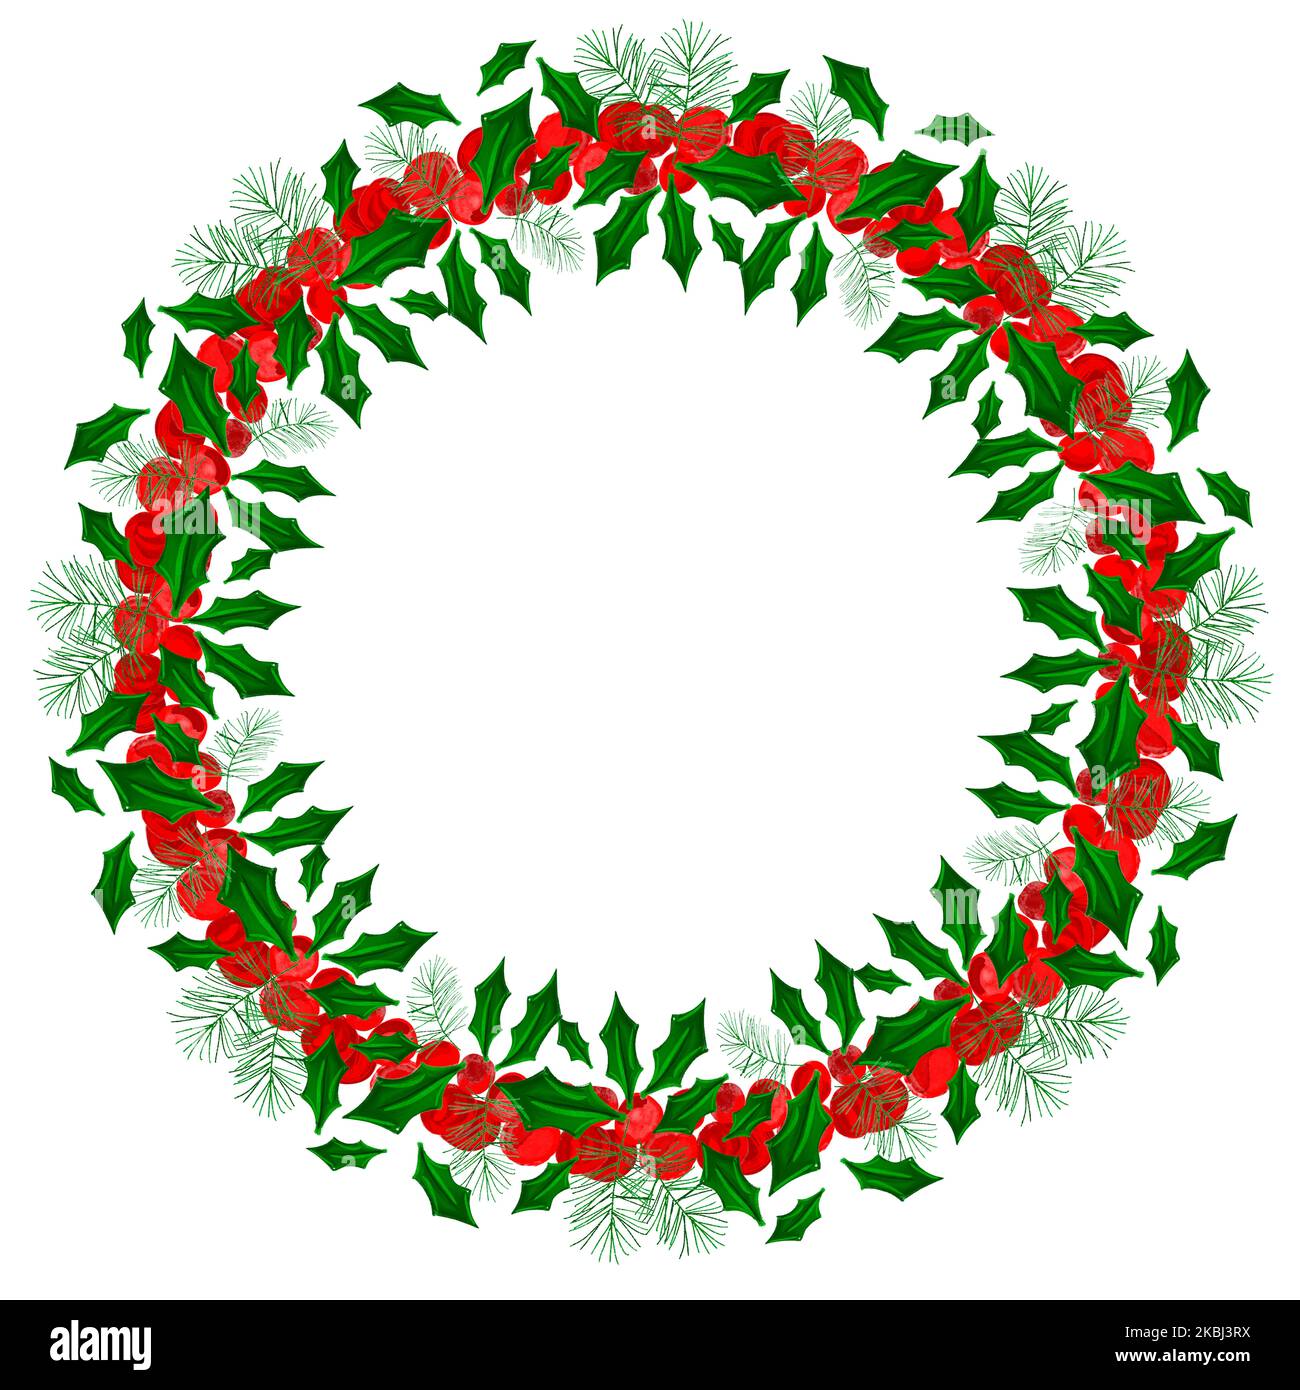 Merry Christmas wreath for different decorating purposes. Stock illustration. Stock Photo